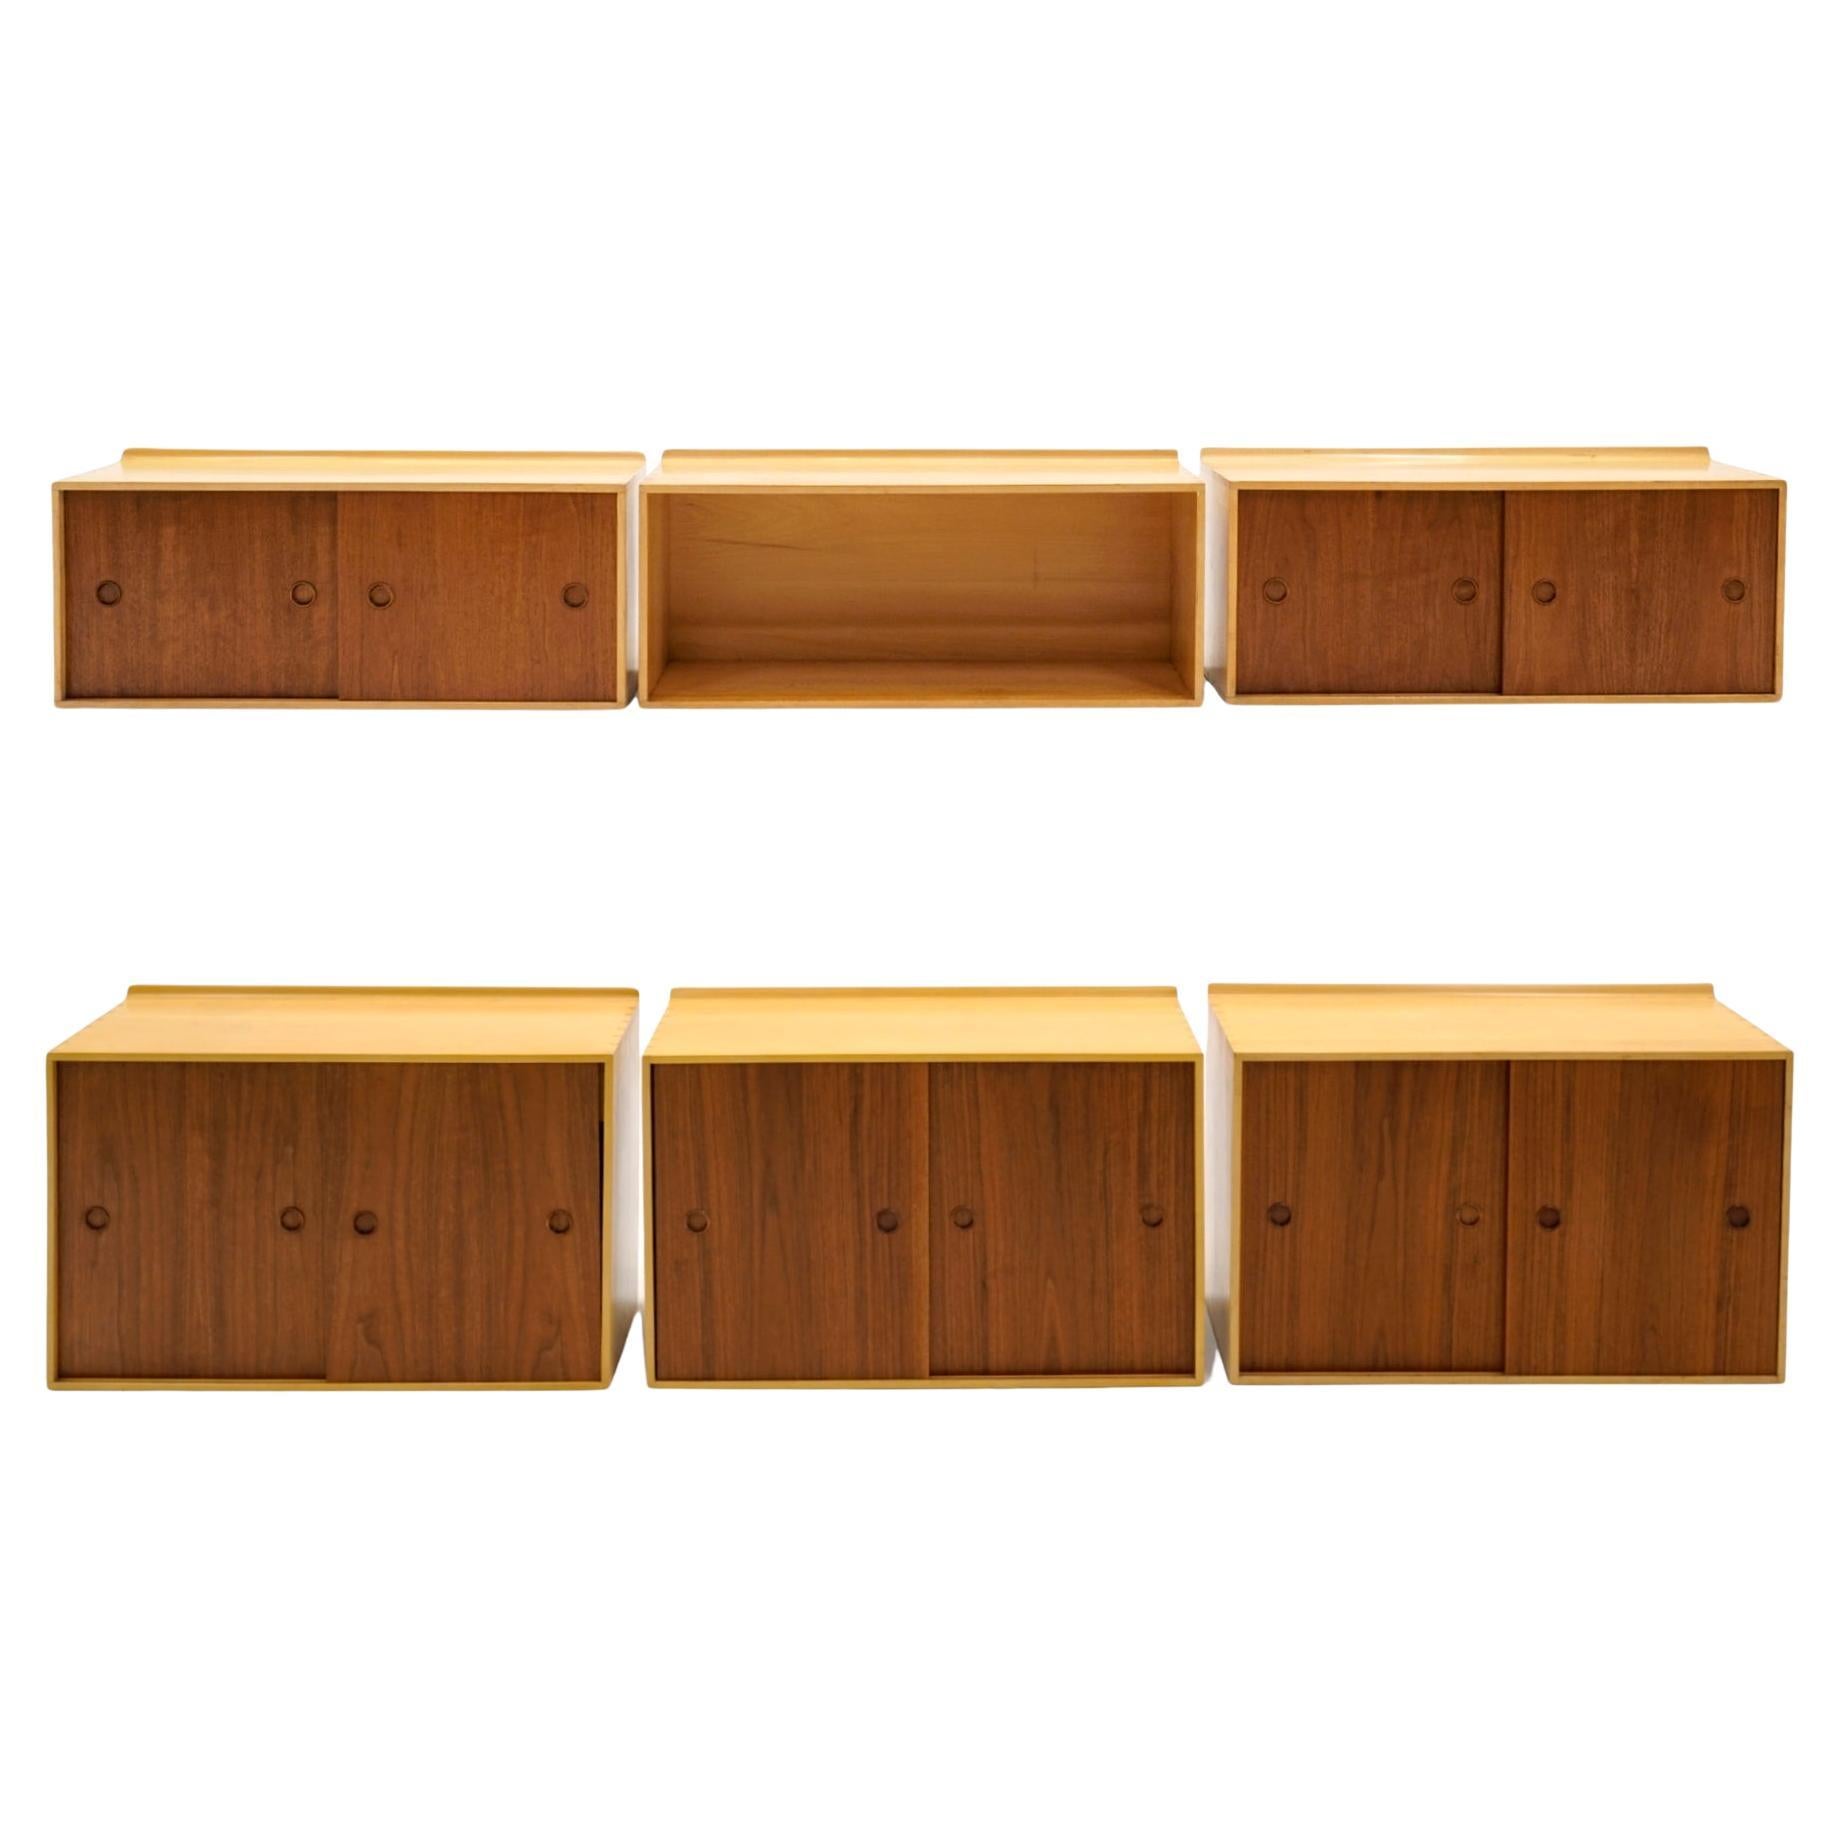 Wall Mounted Cabinets by Finn Juhl for Baker, Walnut and Birch, Great Condition For Sale